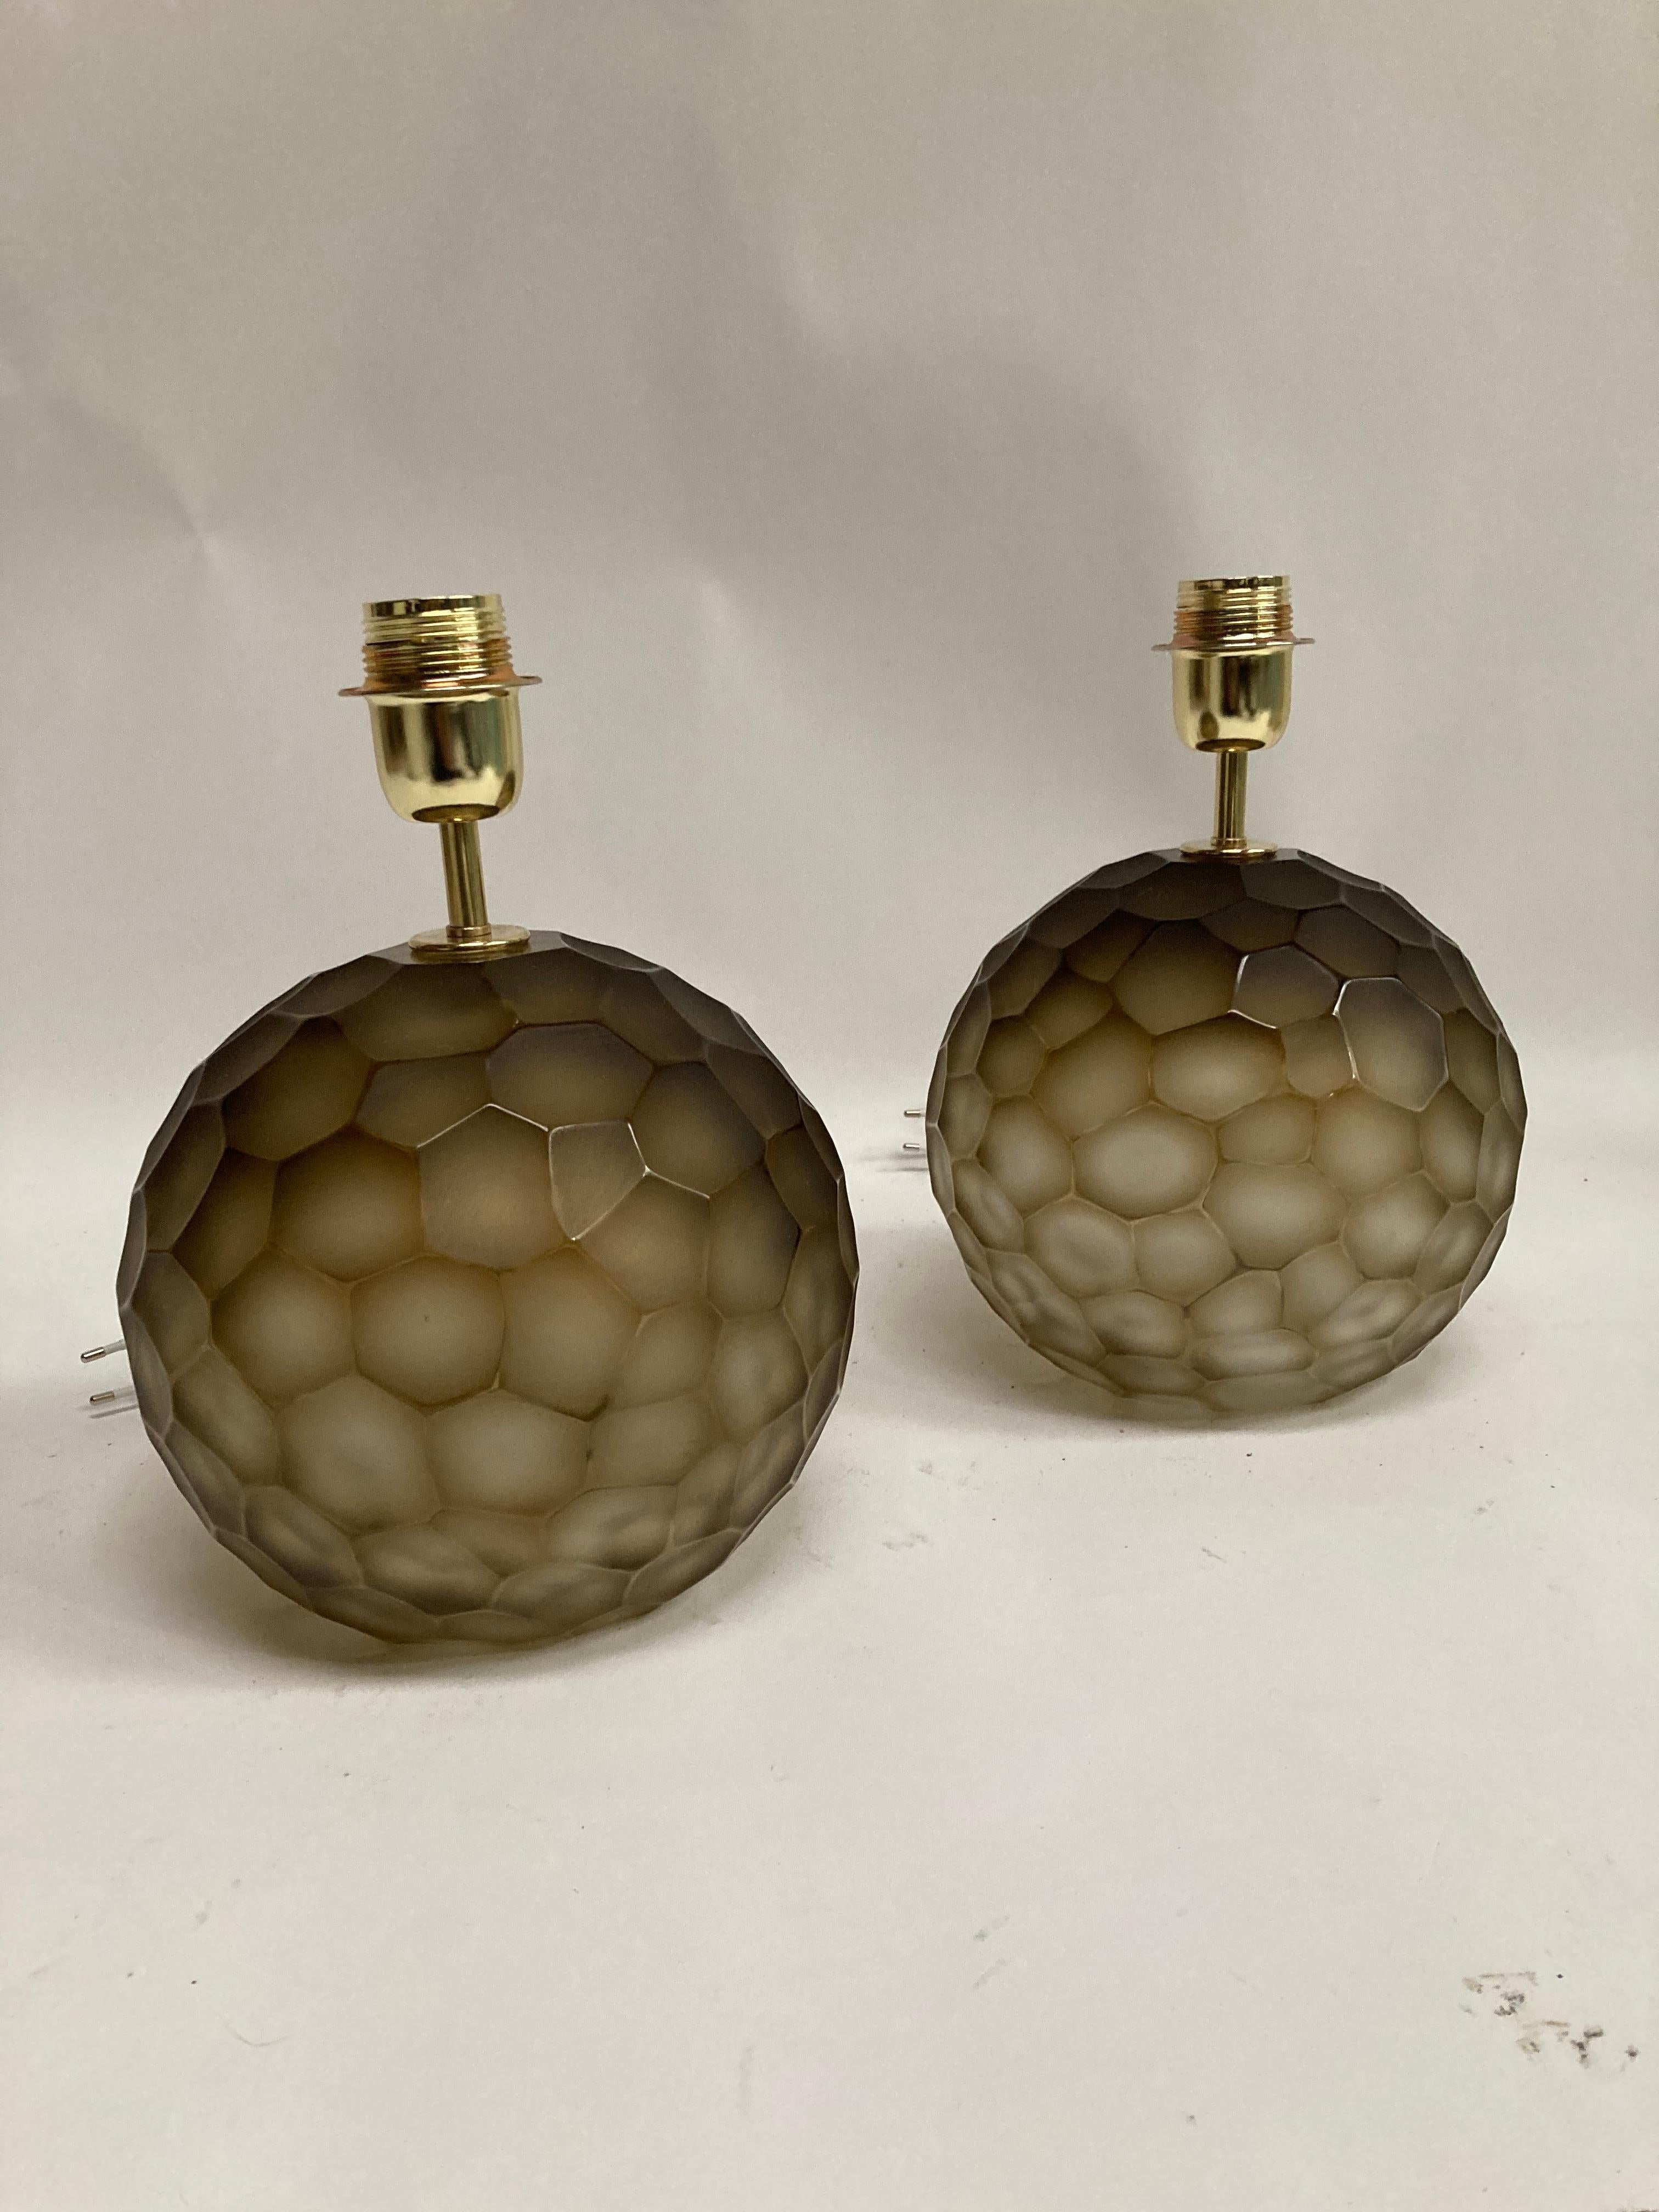 Very nice faceted bowl Murano glass lamps.